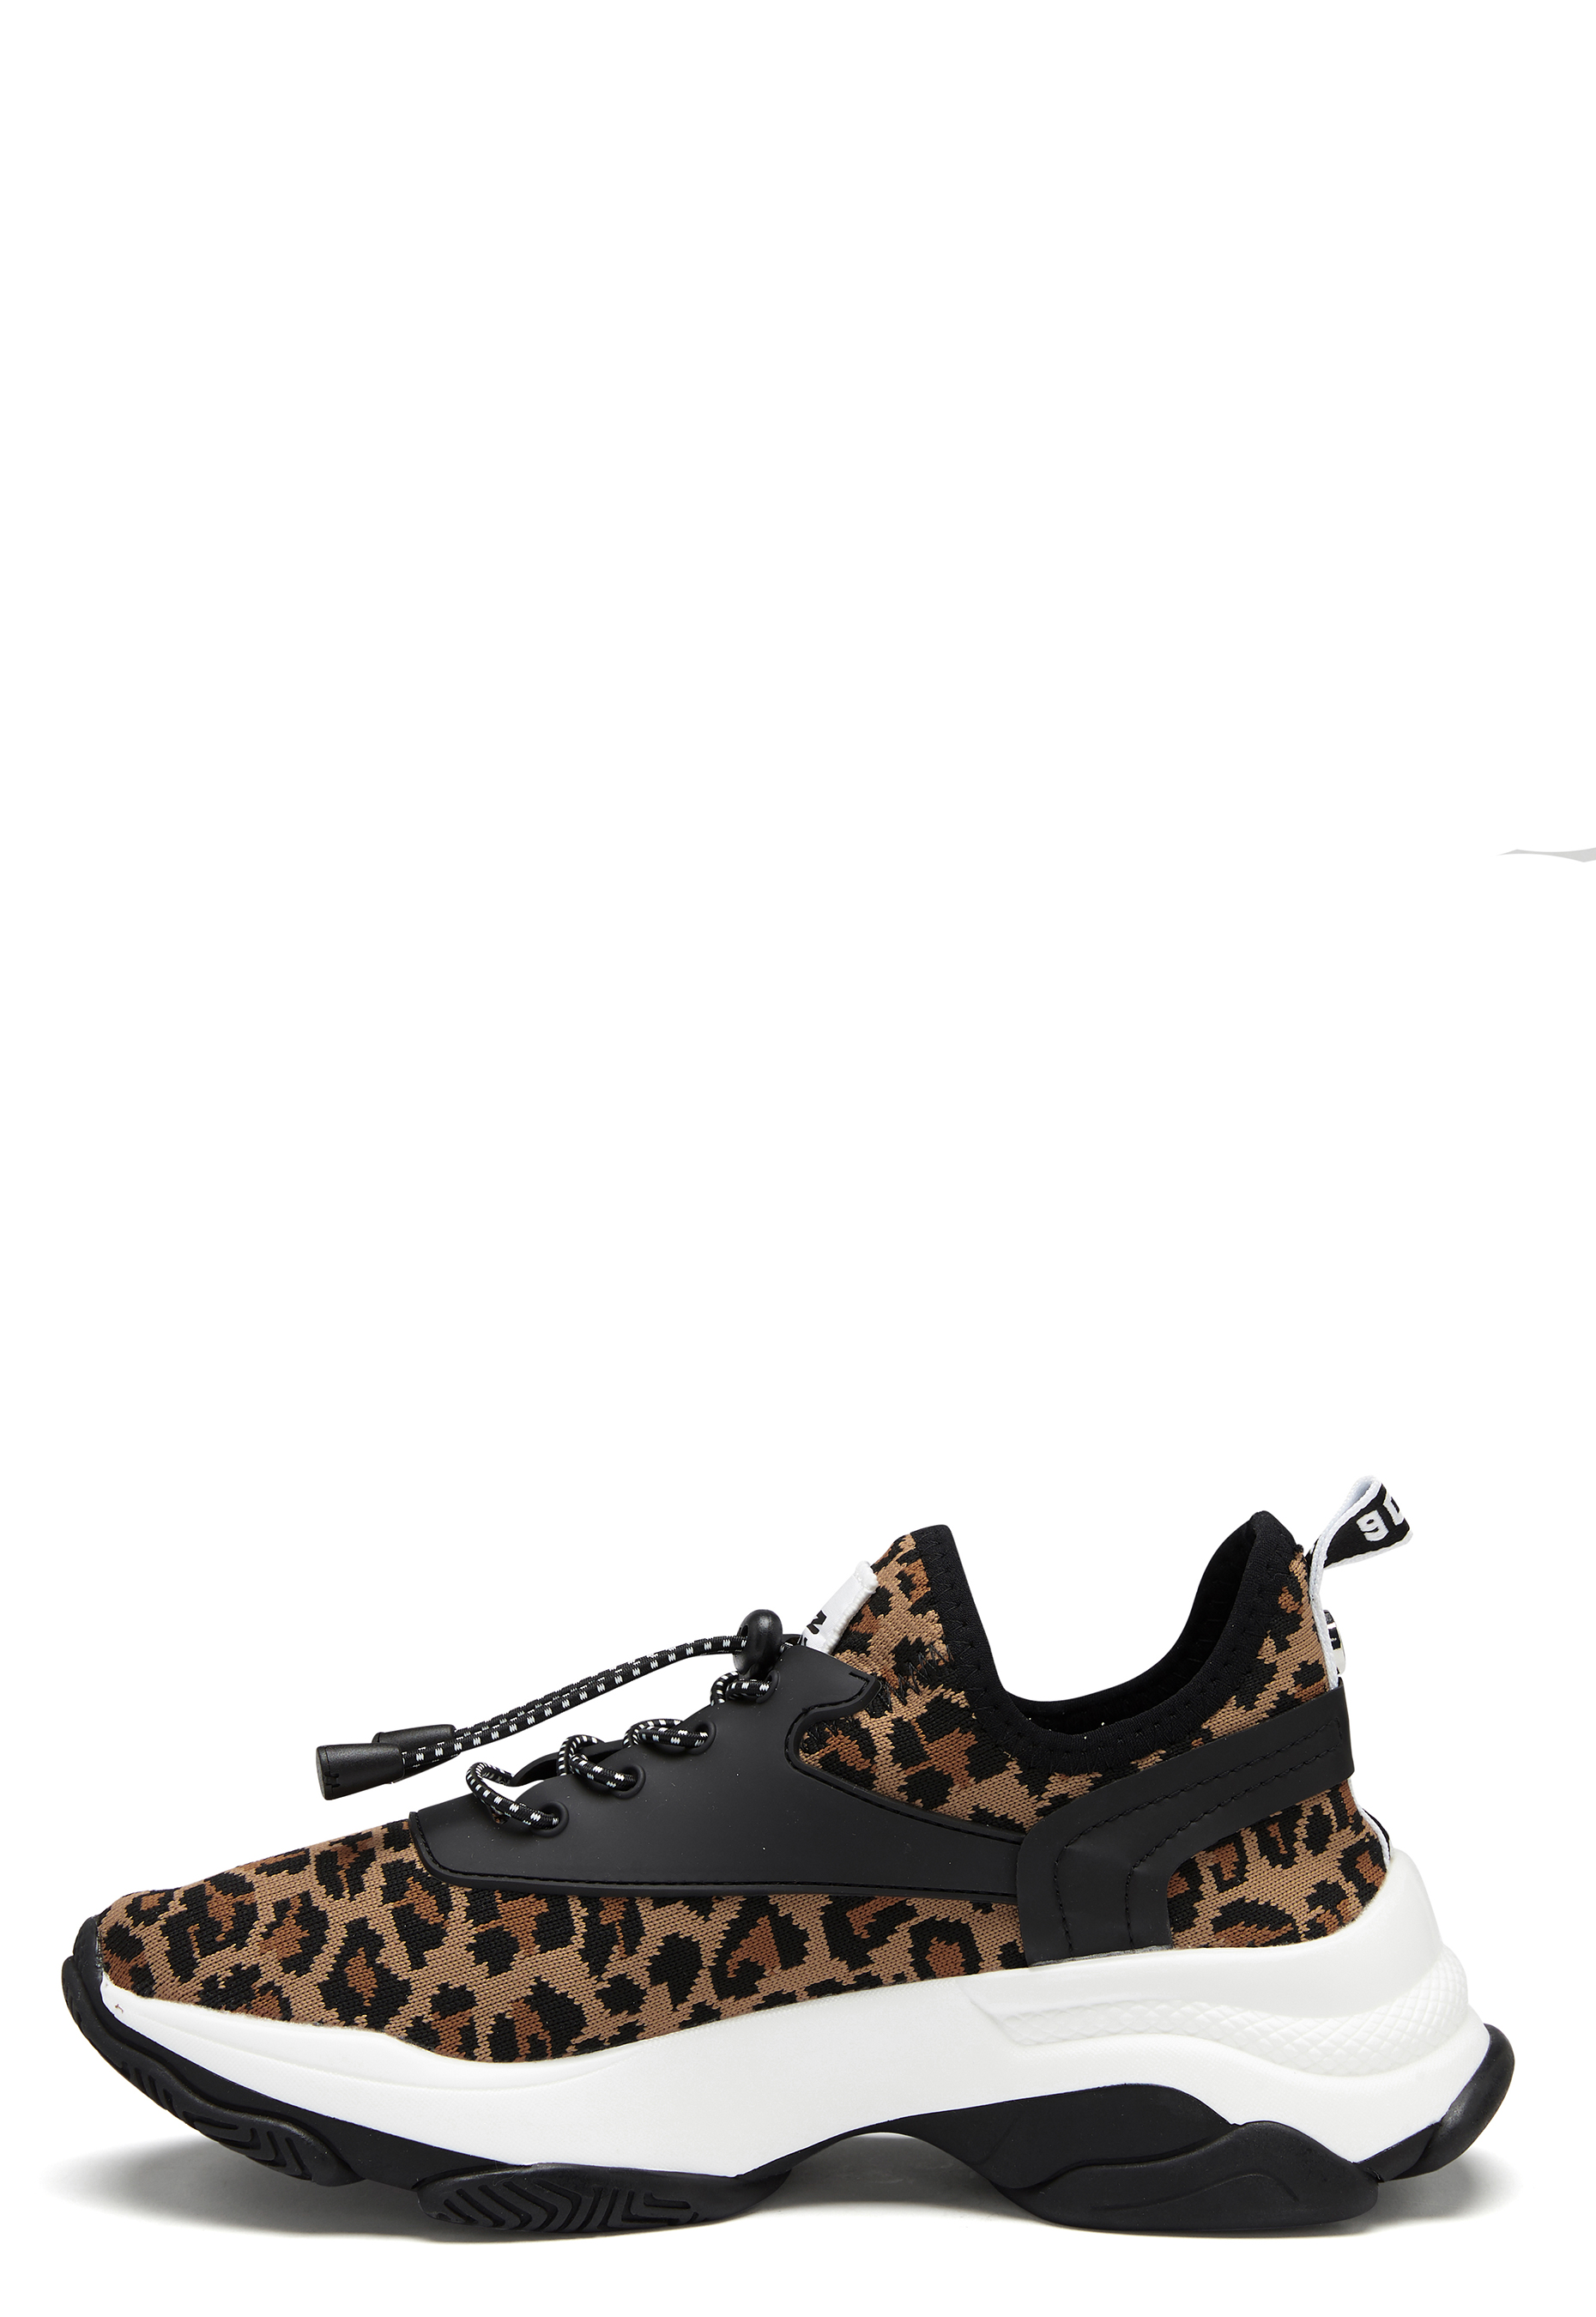 ros Antagonisme lugt leopard steve madden sneakers Today's Deals- OFF-61% >Free Delivery